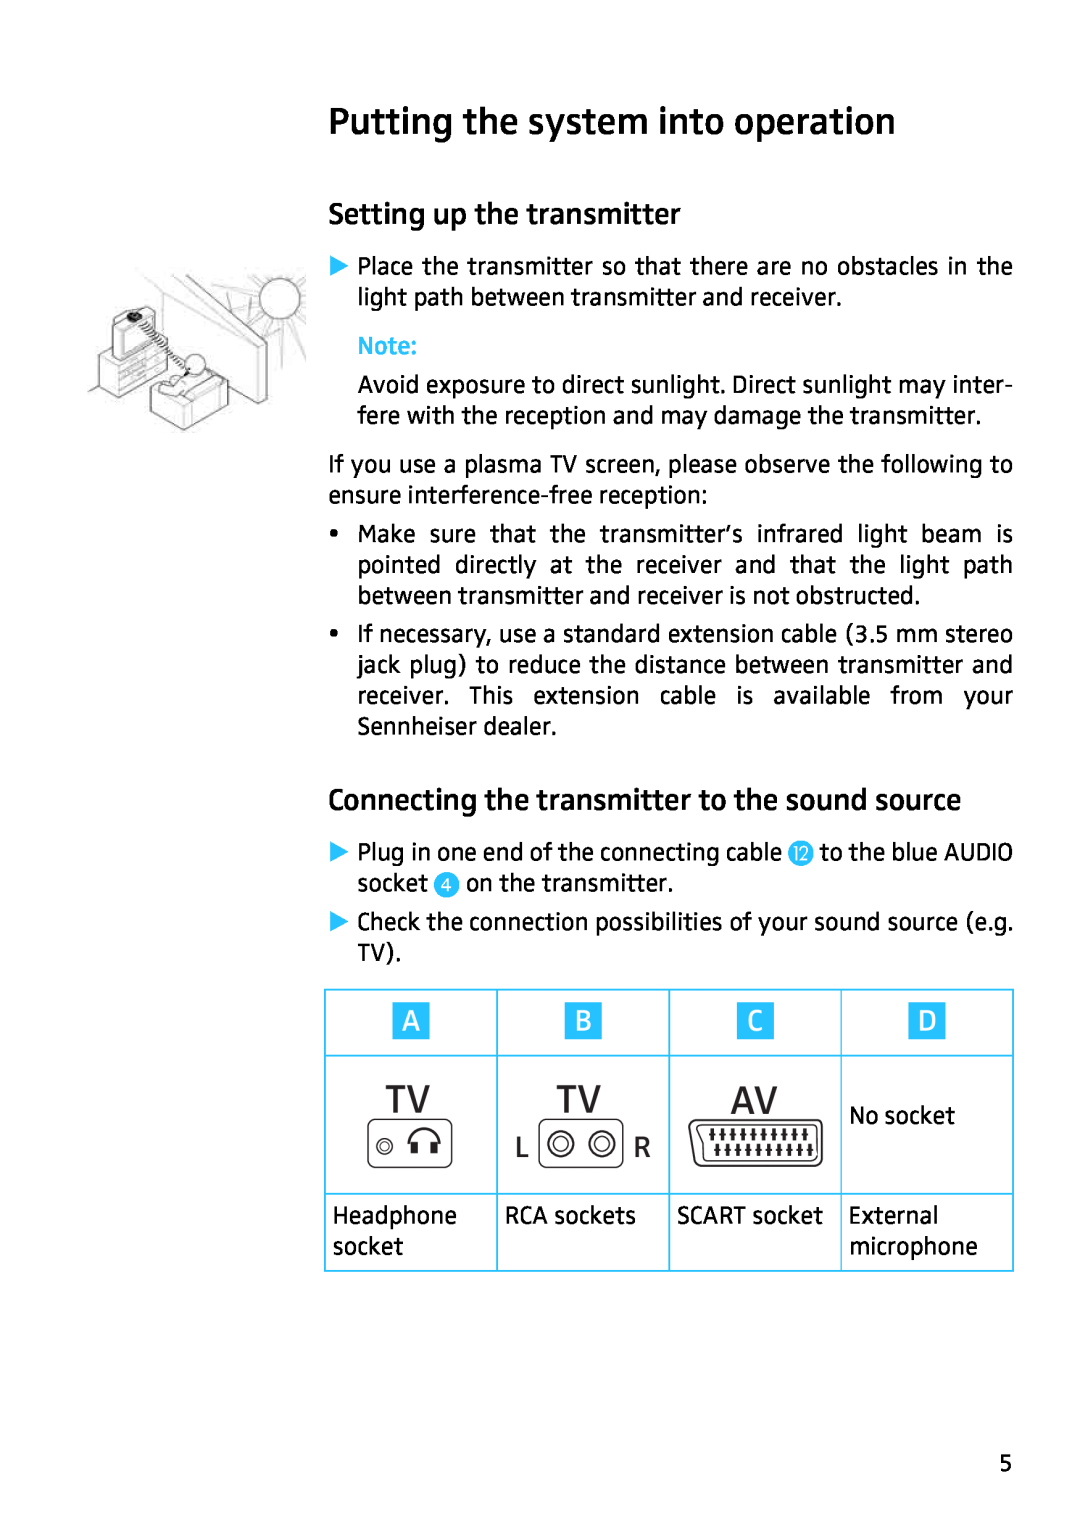 Sennheiser IS410 manual Putting the system into operation 